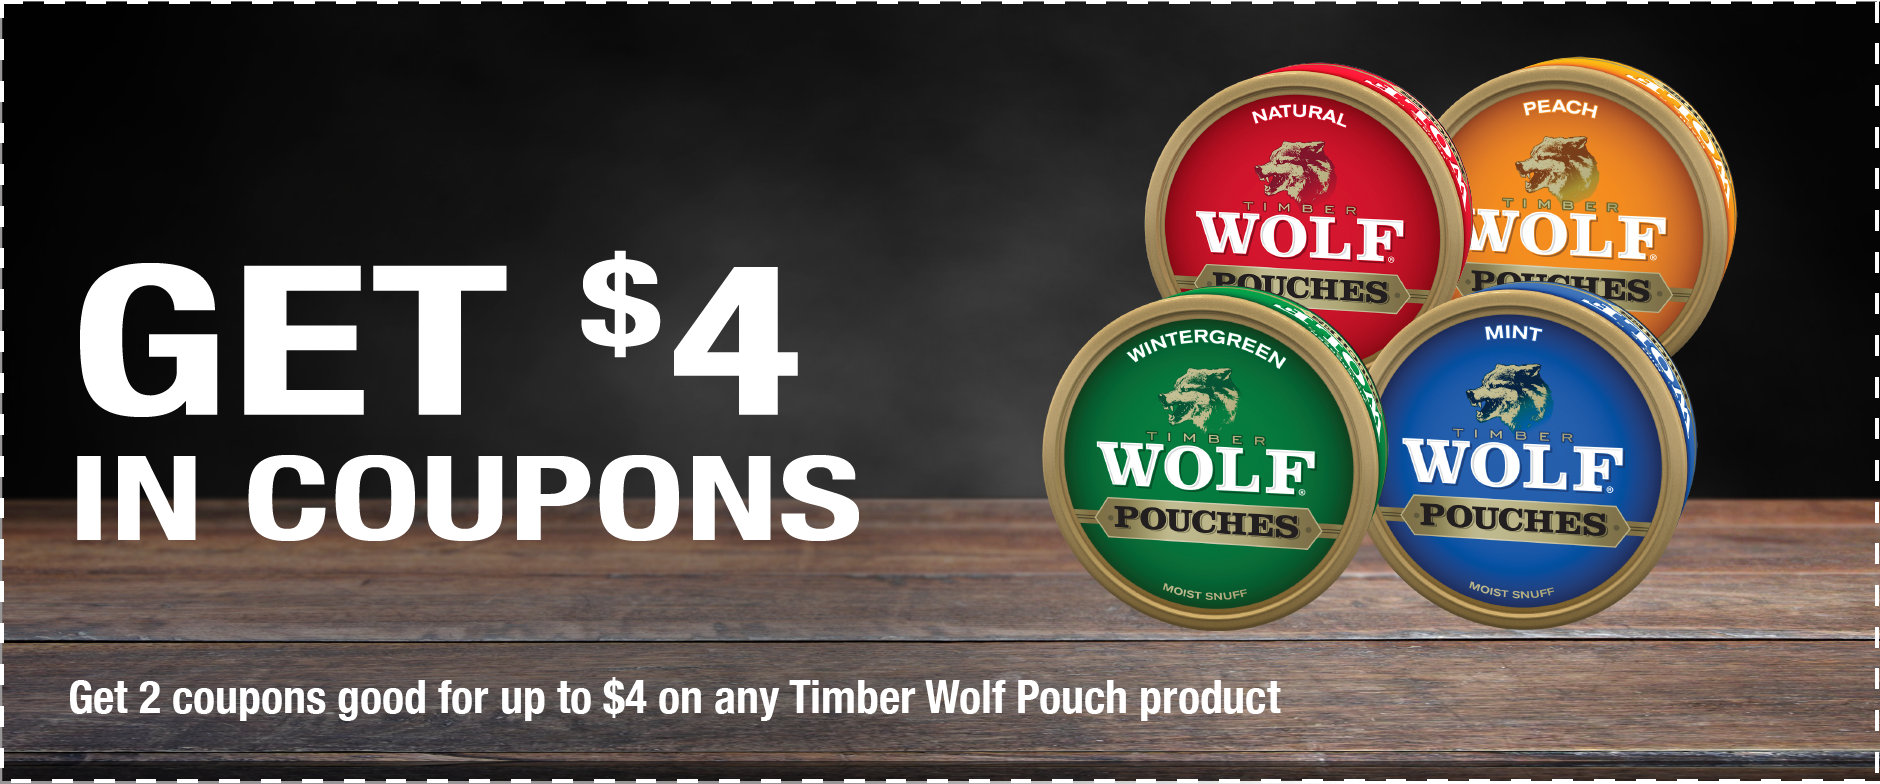 get-coupons-for-timber-wolf-moist-snuff-tobacco-products